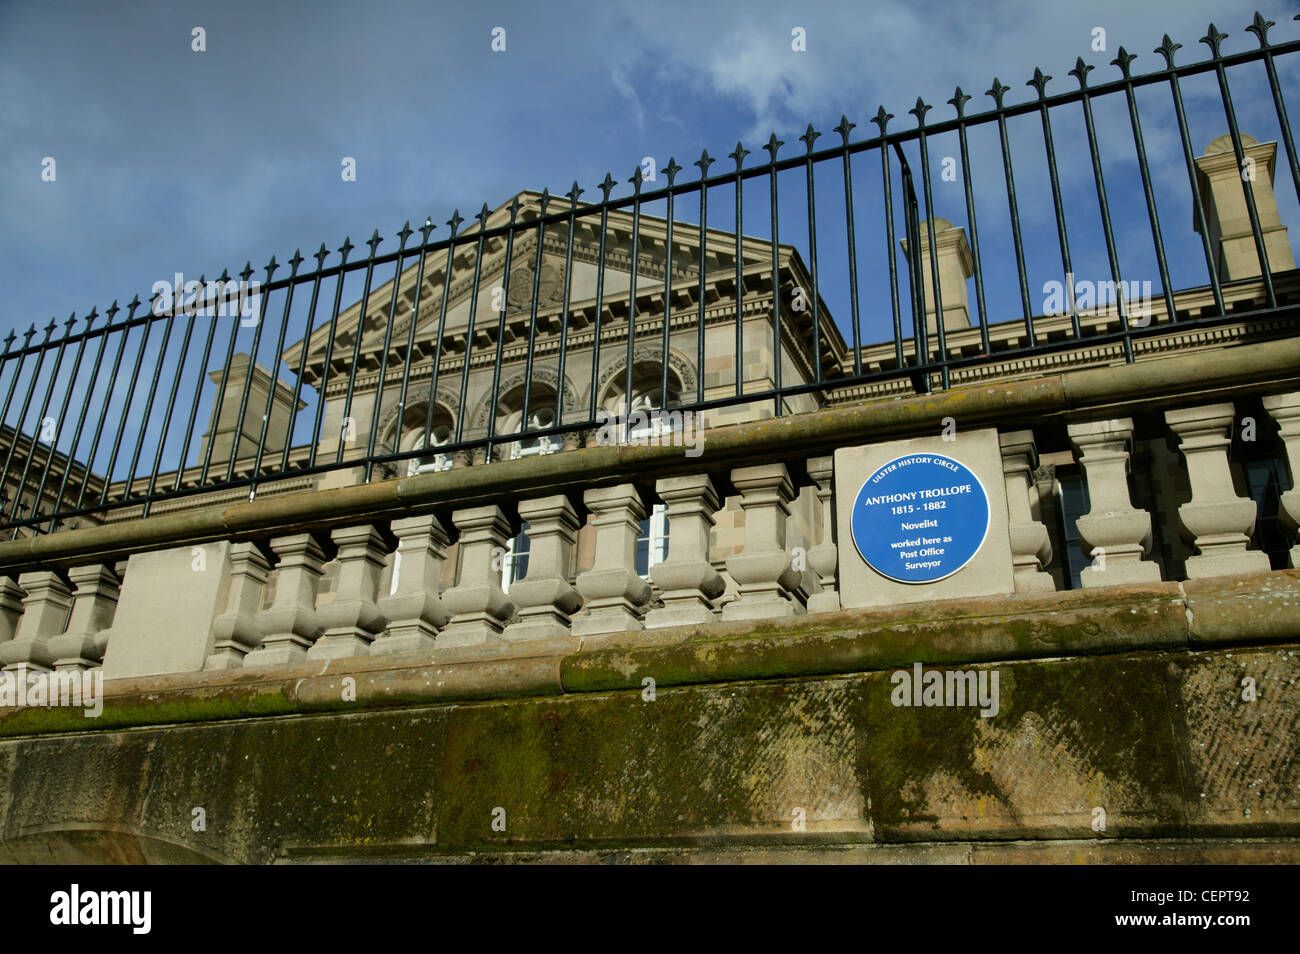 An Anthony Trollope plaque at the general post office in Custom House square. Stock Photo